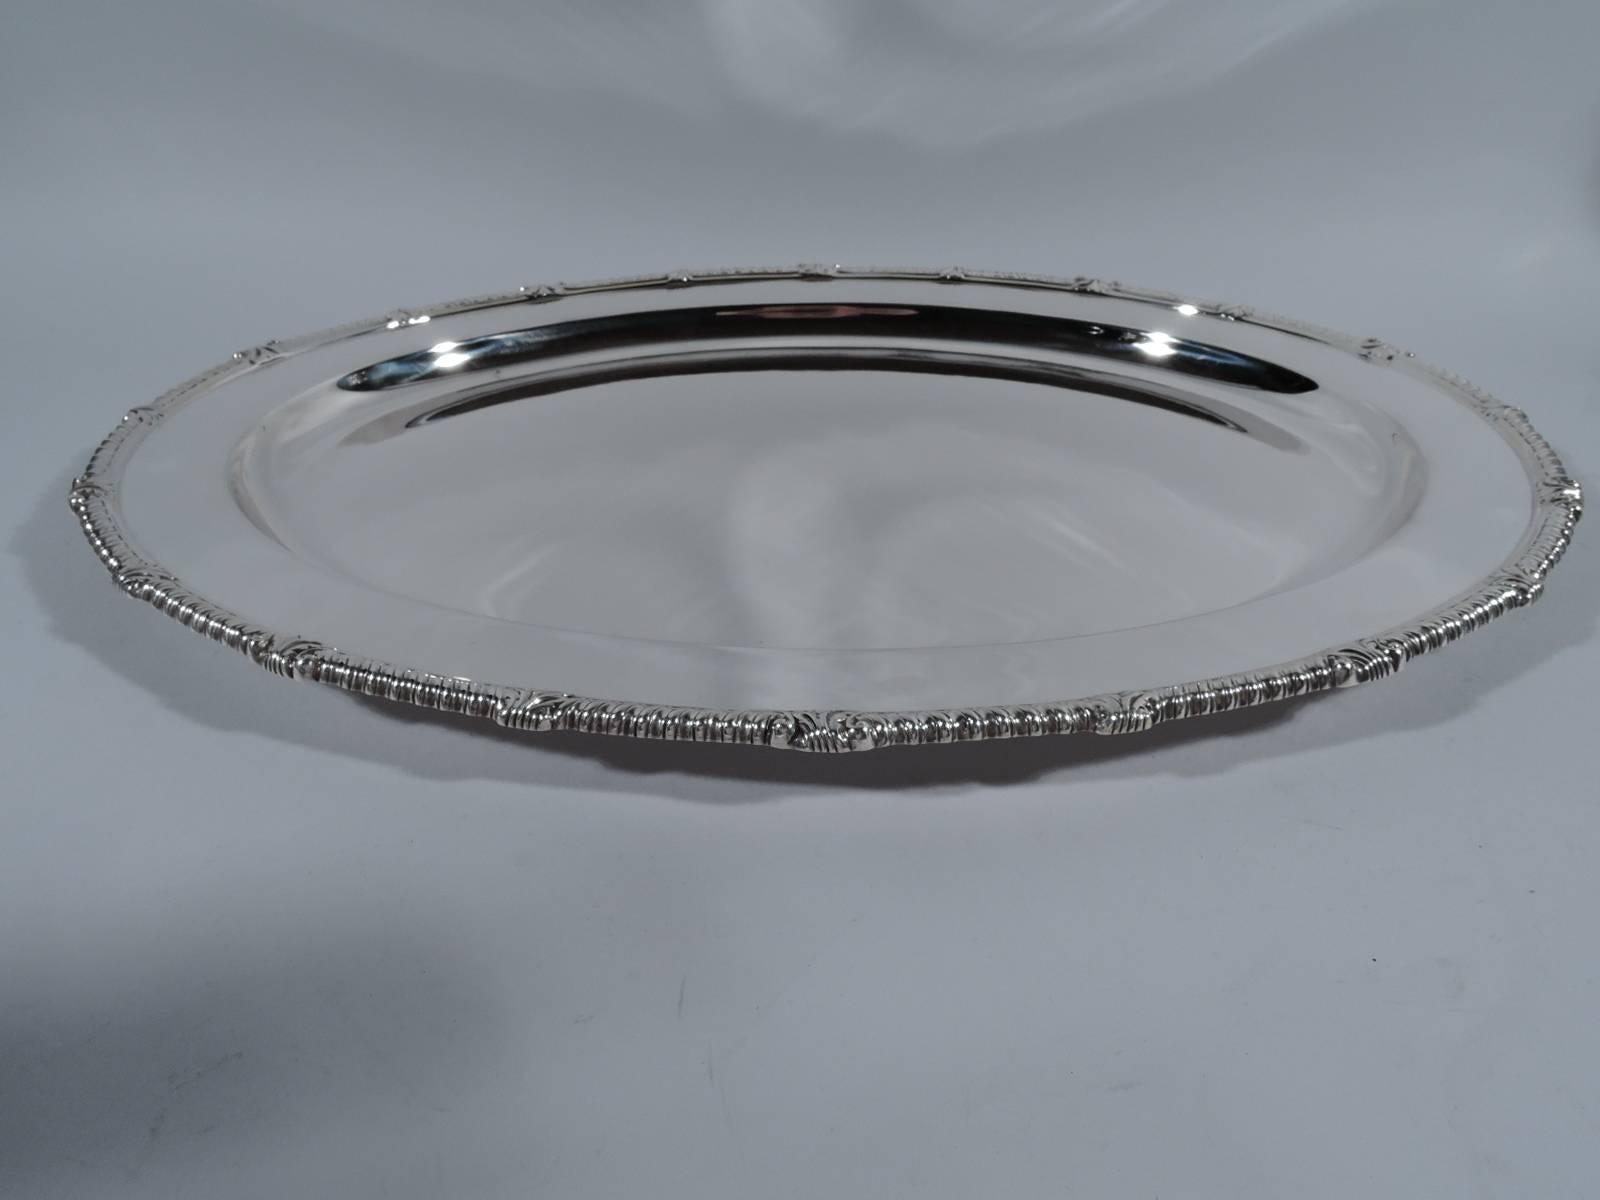 Georgian-style serving tray. Made by Tiffany & Co. in New York. Oval with well. Rim gadrooned with leaves. Hallmark includes postwar pattern no. 23818. Weight: 63 troy ounces.